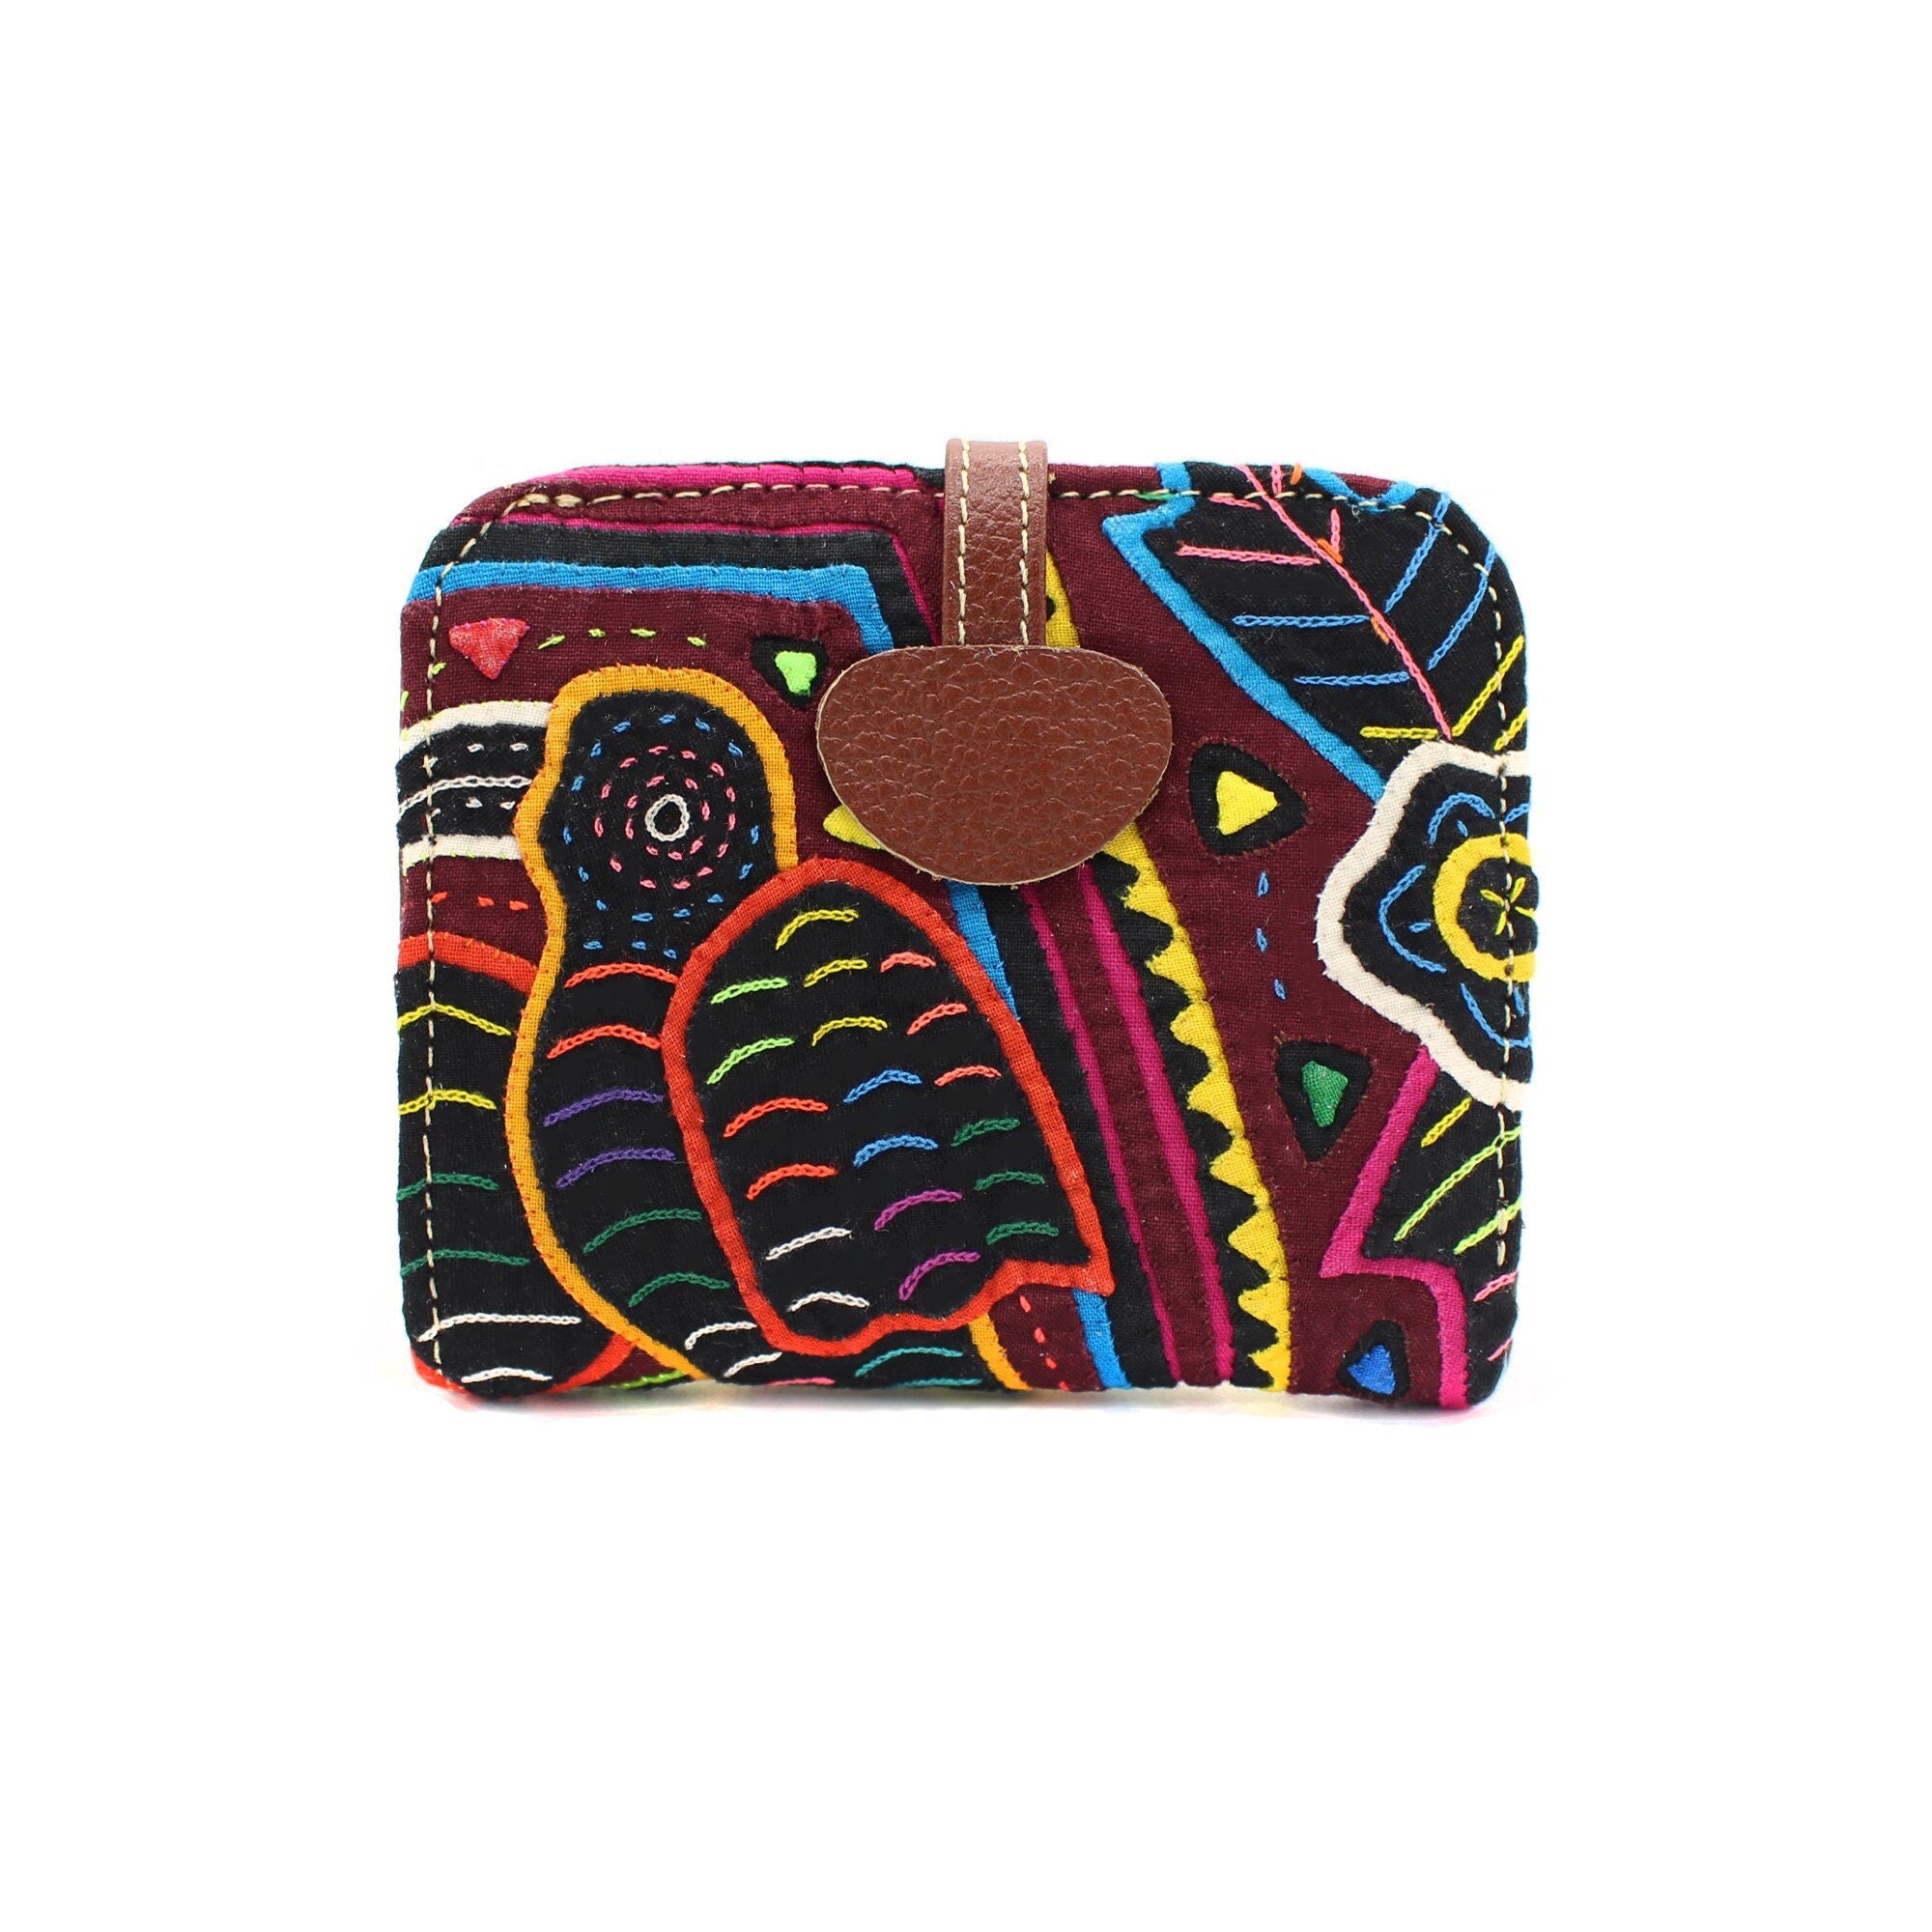 Full Mola + Leather Wallet with Picture Pocket | Handmade Mola from the Kuna Tribe